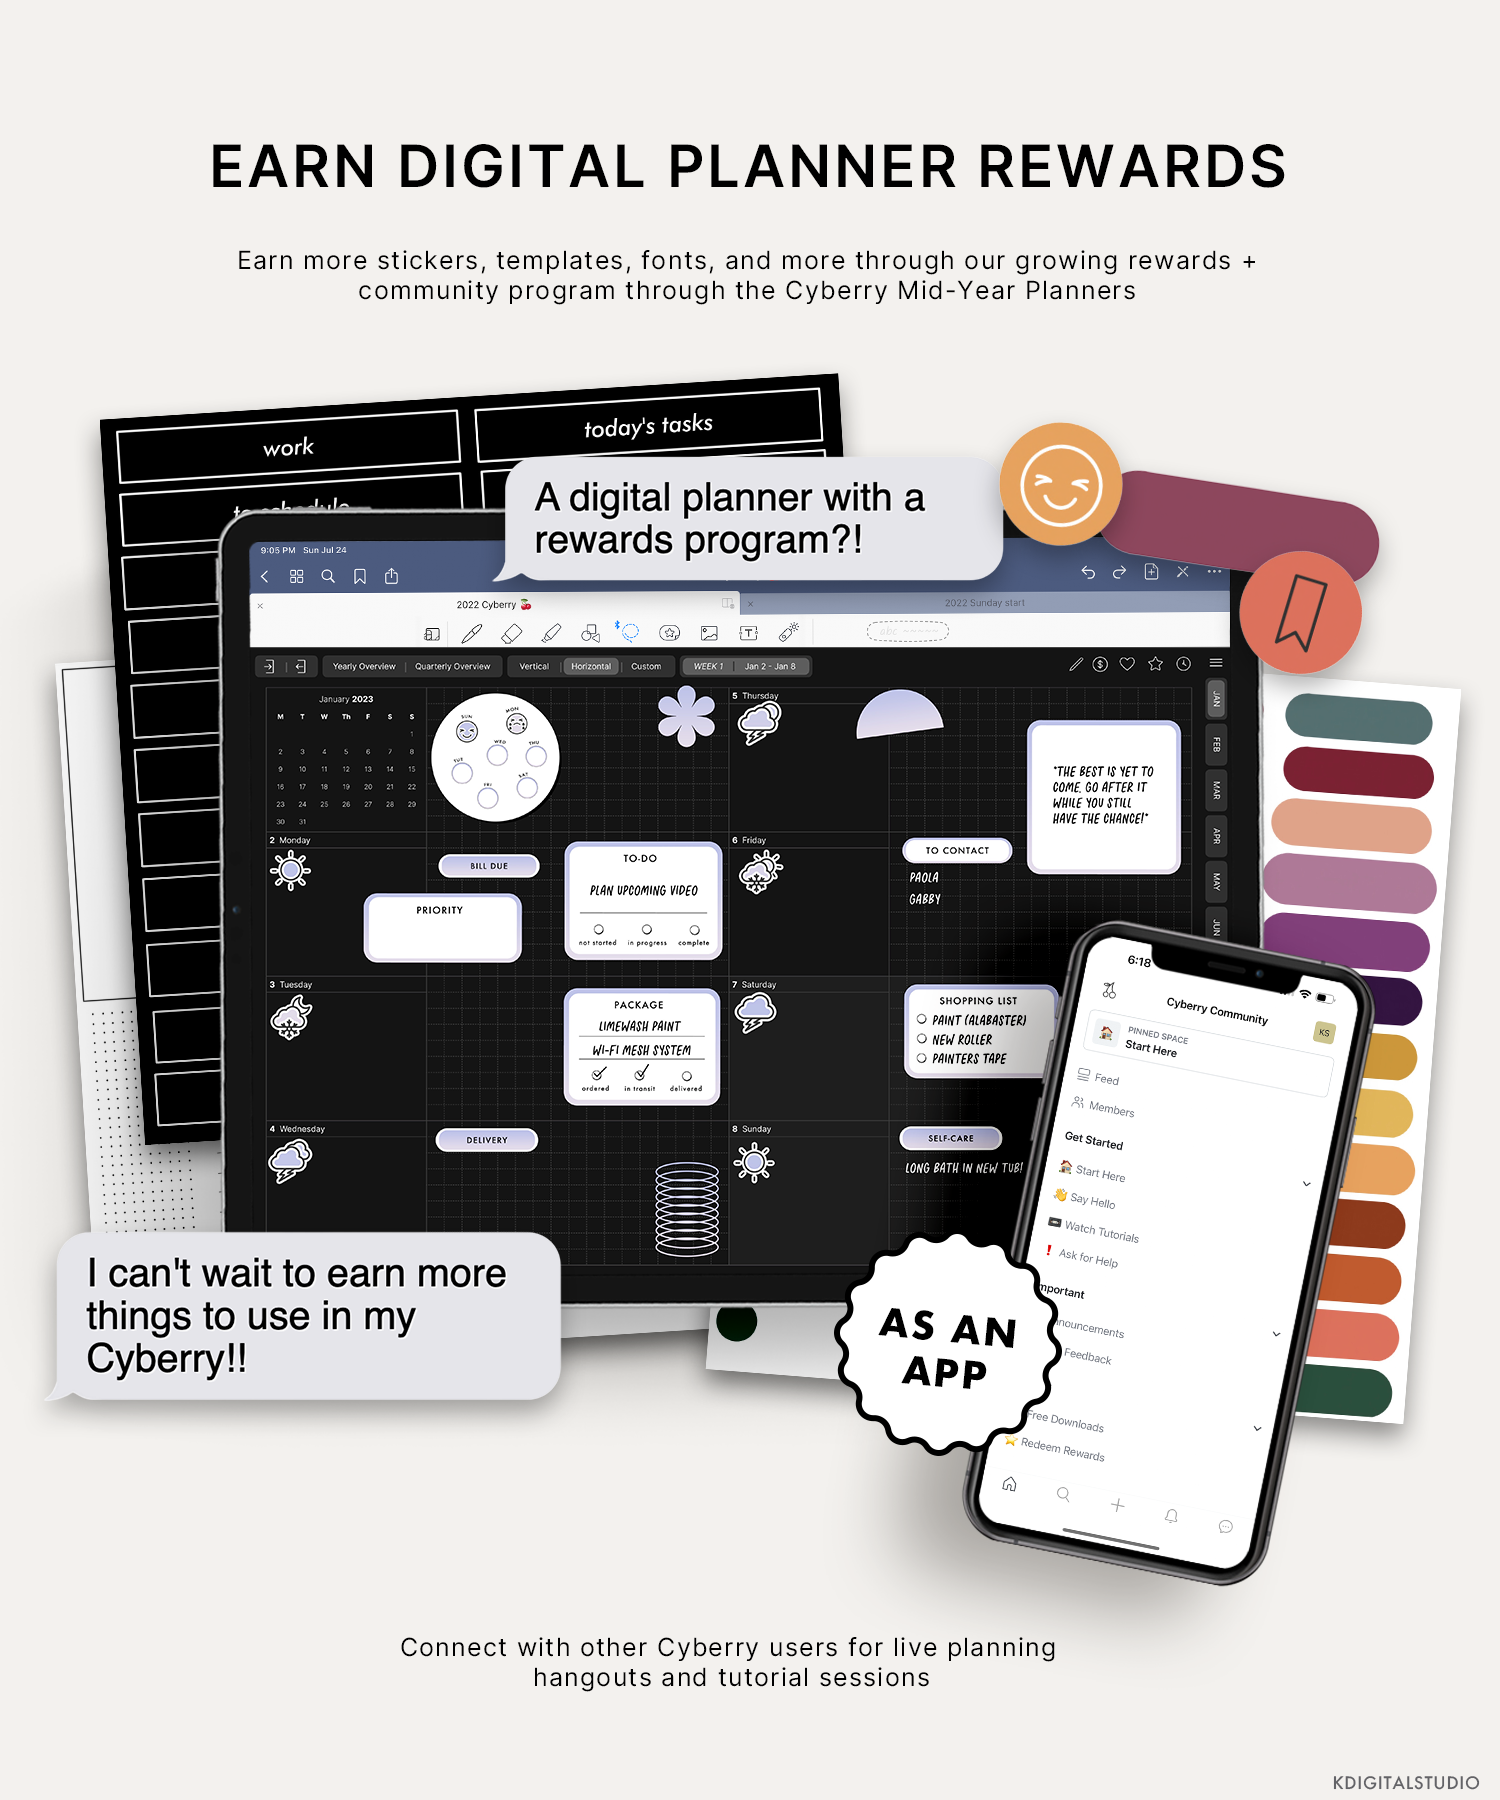 Earn more stickers, templates, fonts, and more through our growing rewards and community program via the Cyberry Mid-Year Digital Planners.